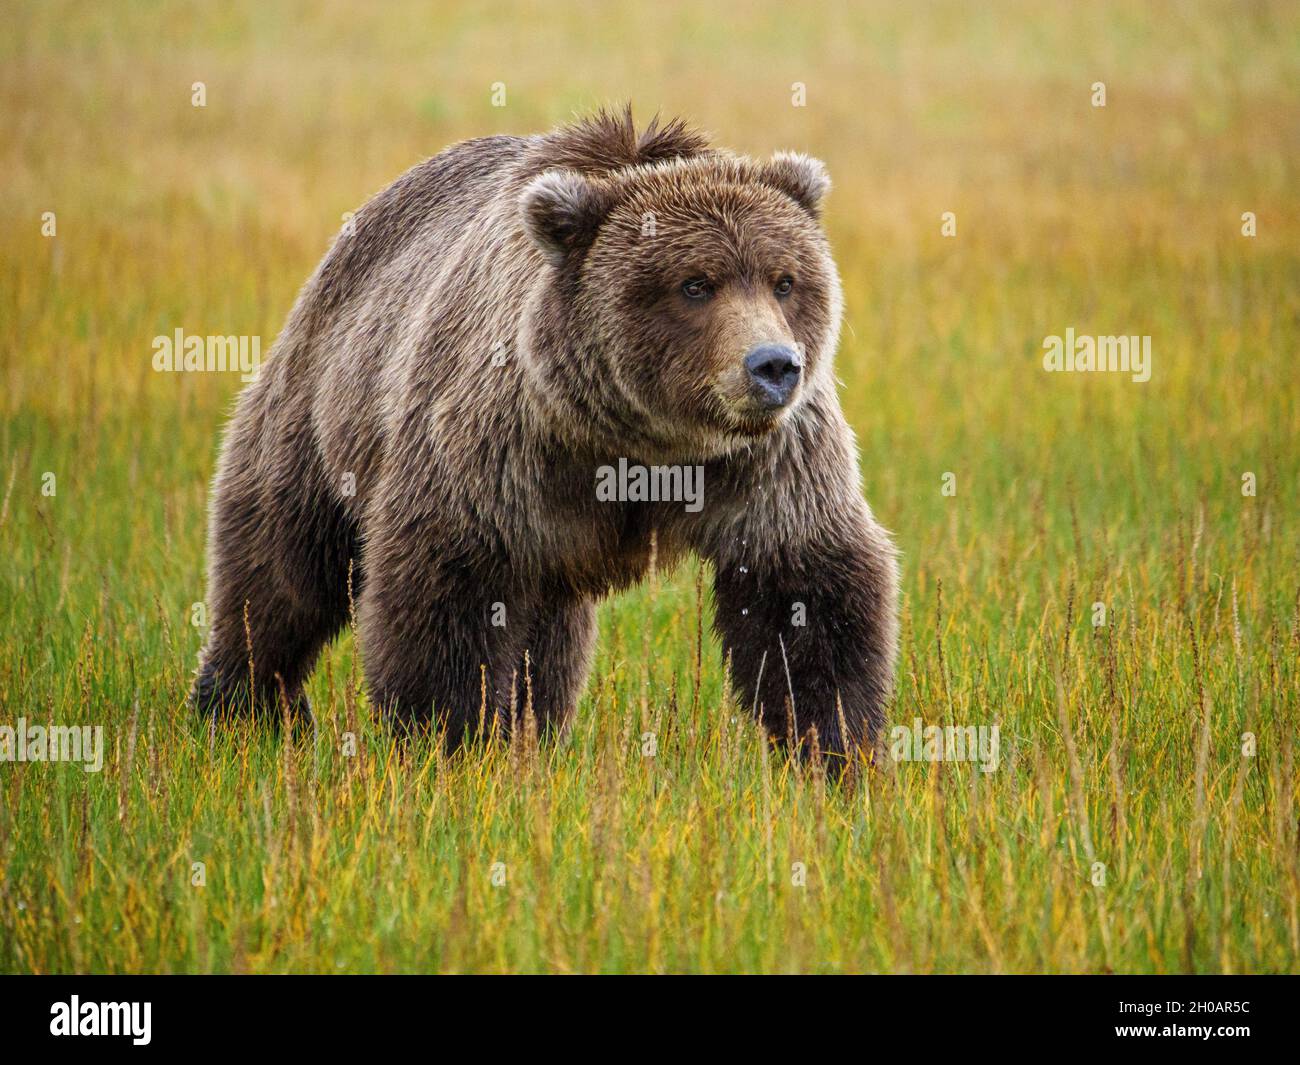 Coastal brown bear, also known as Grizzly Bear (Ursus Arctos). South Central Alaska. United States of America (USA). Stock Photo